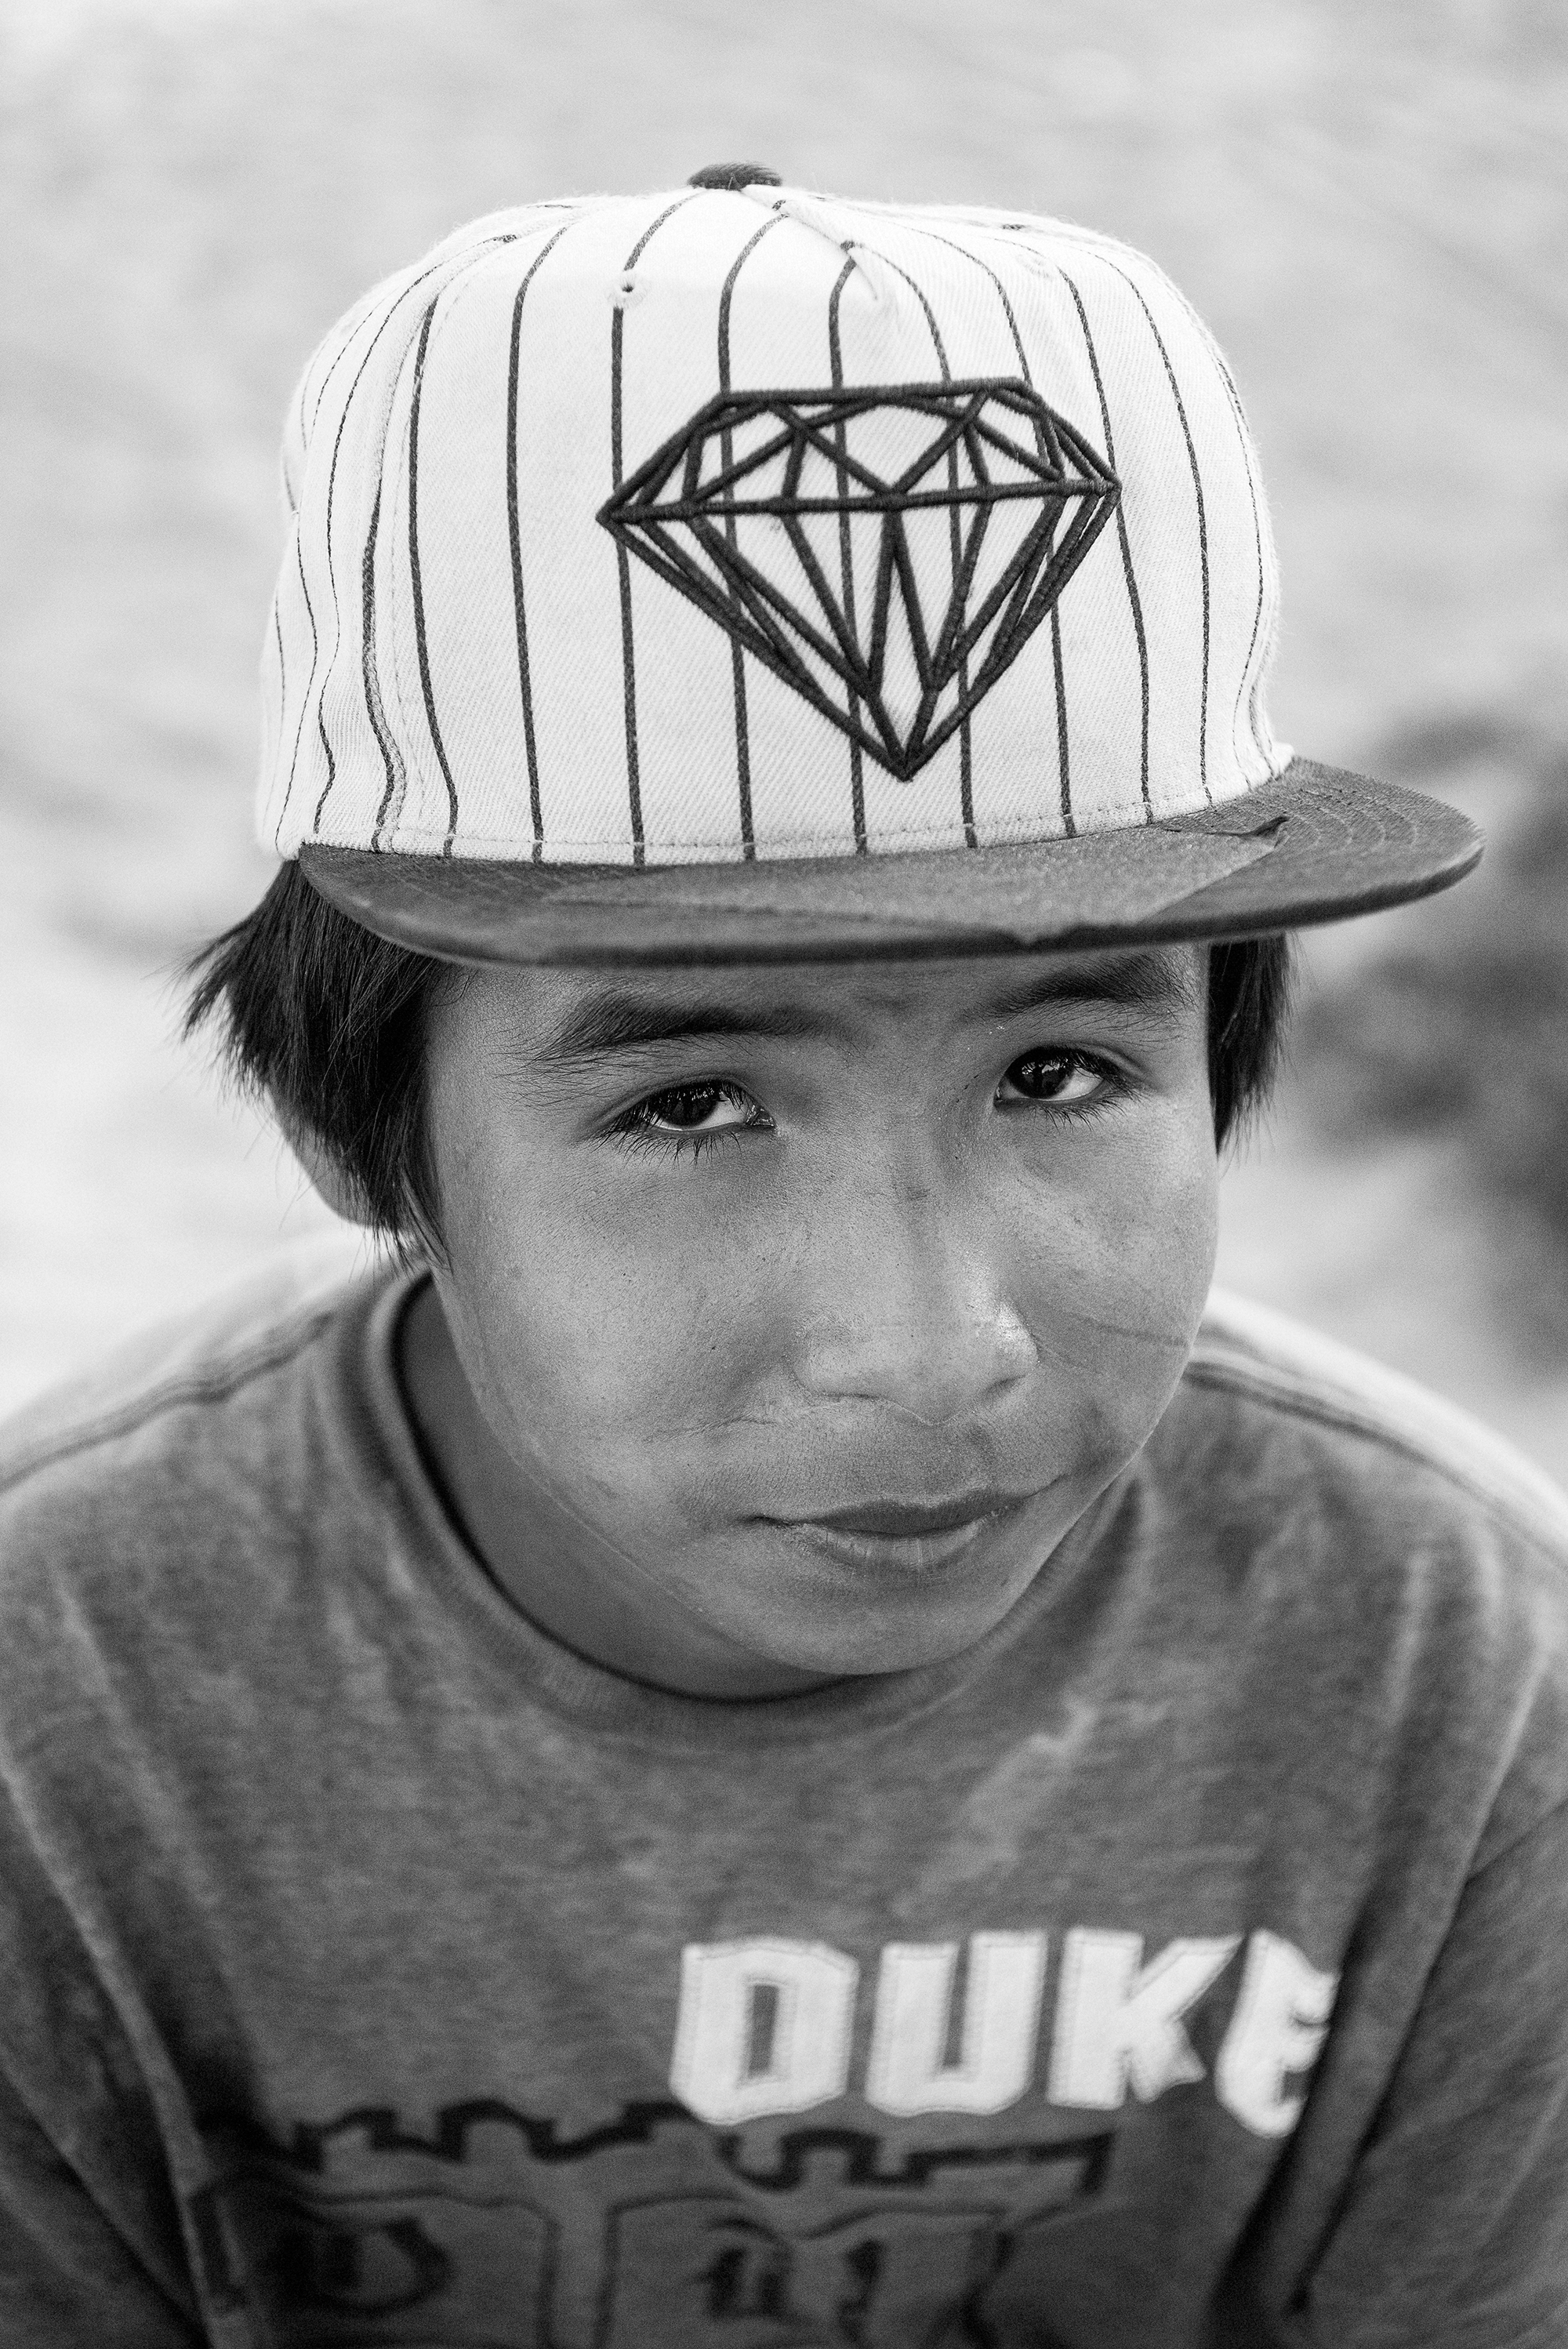 A Lakota youth is seen at the Pine Ridge Indian Reservation in S.D.